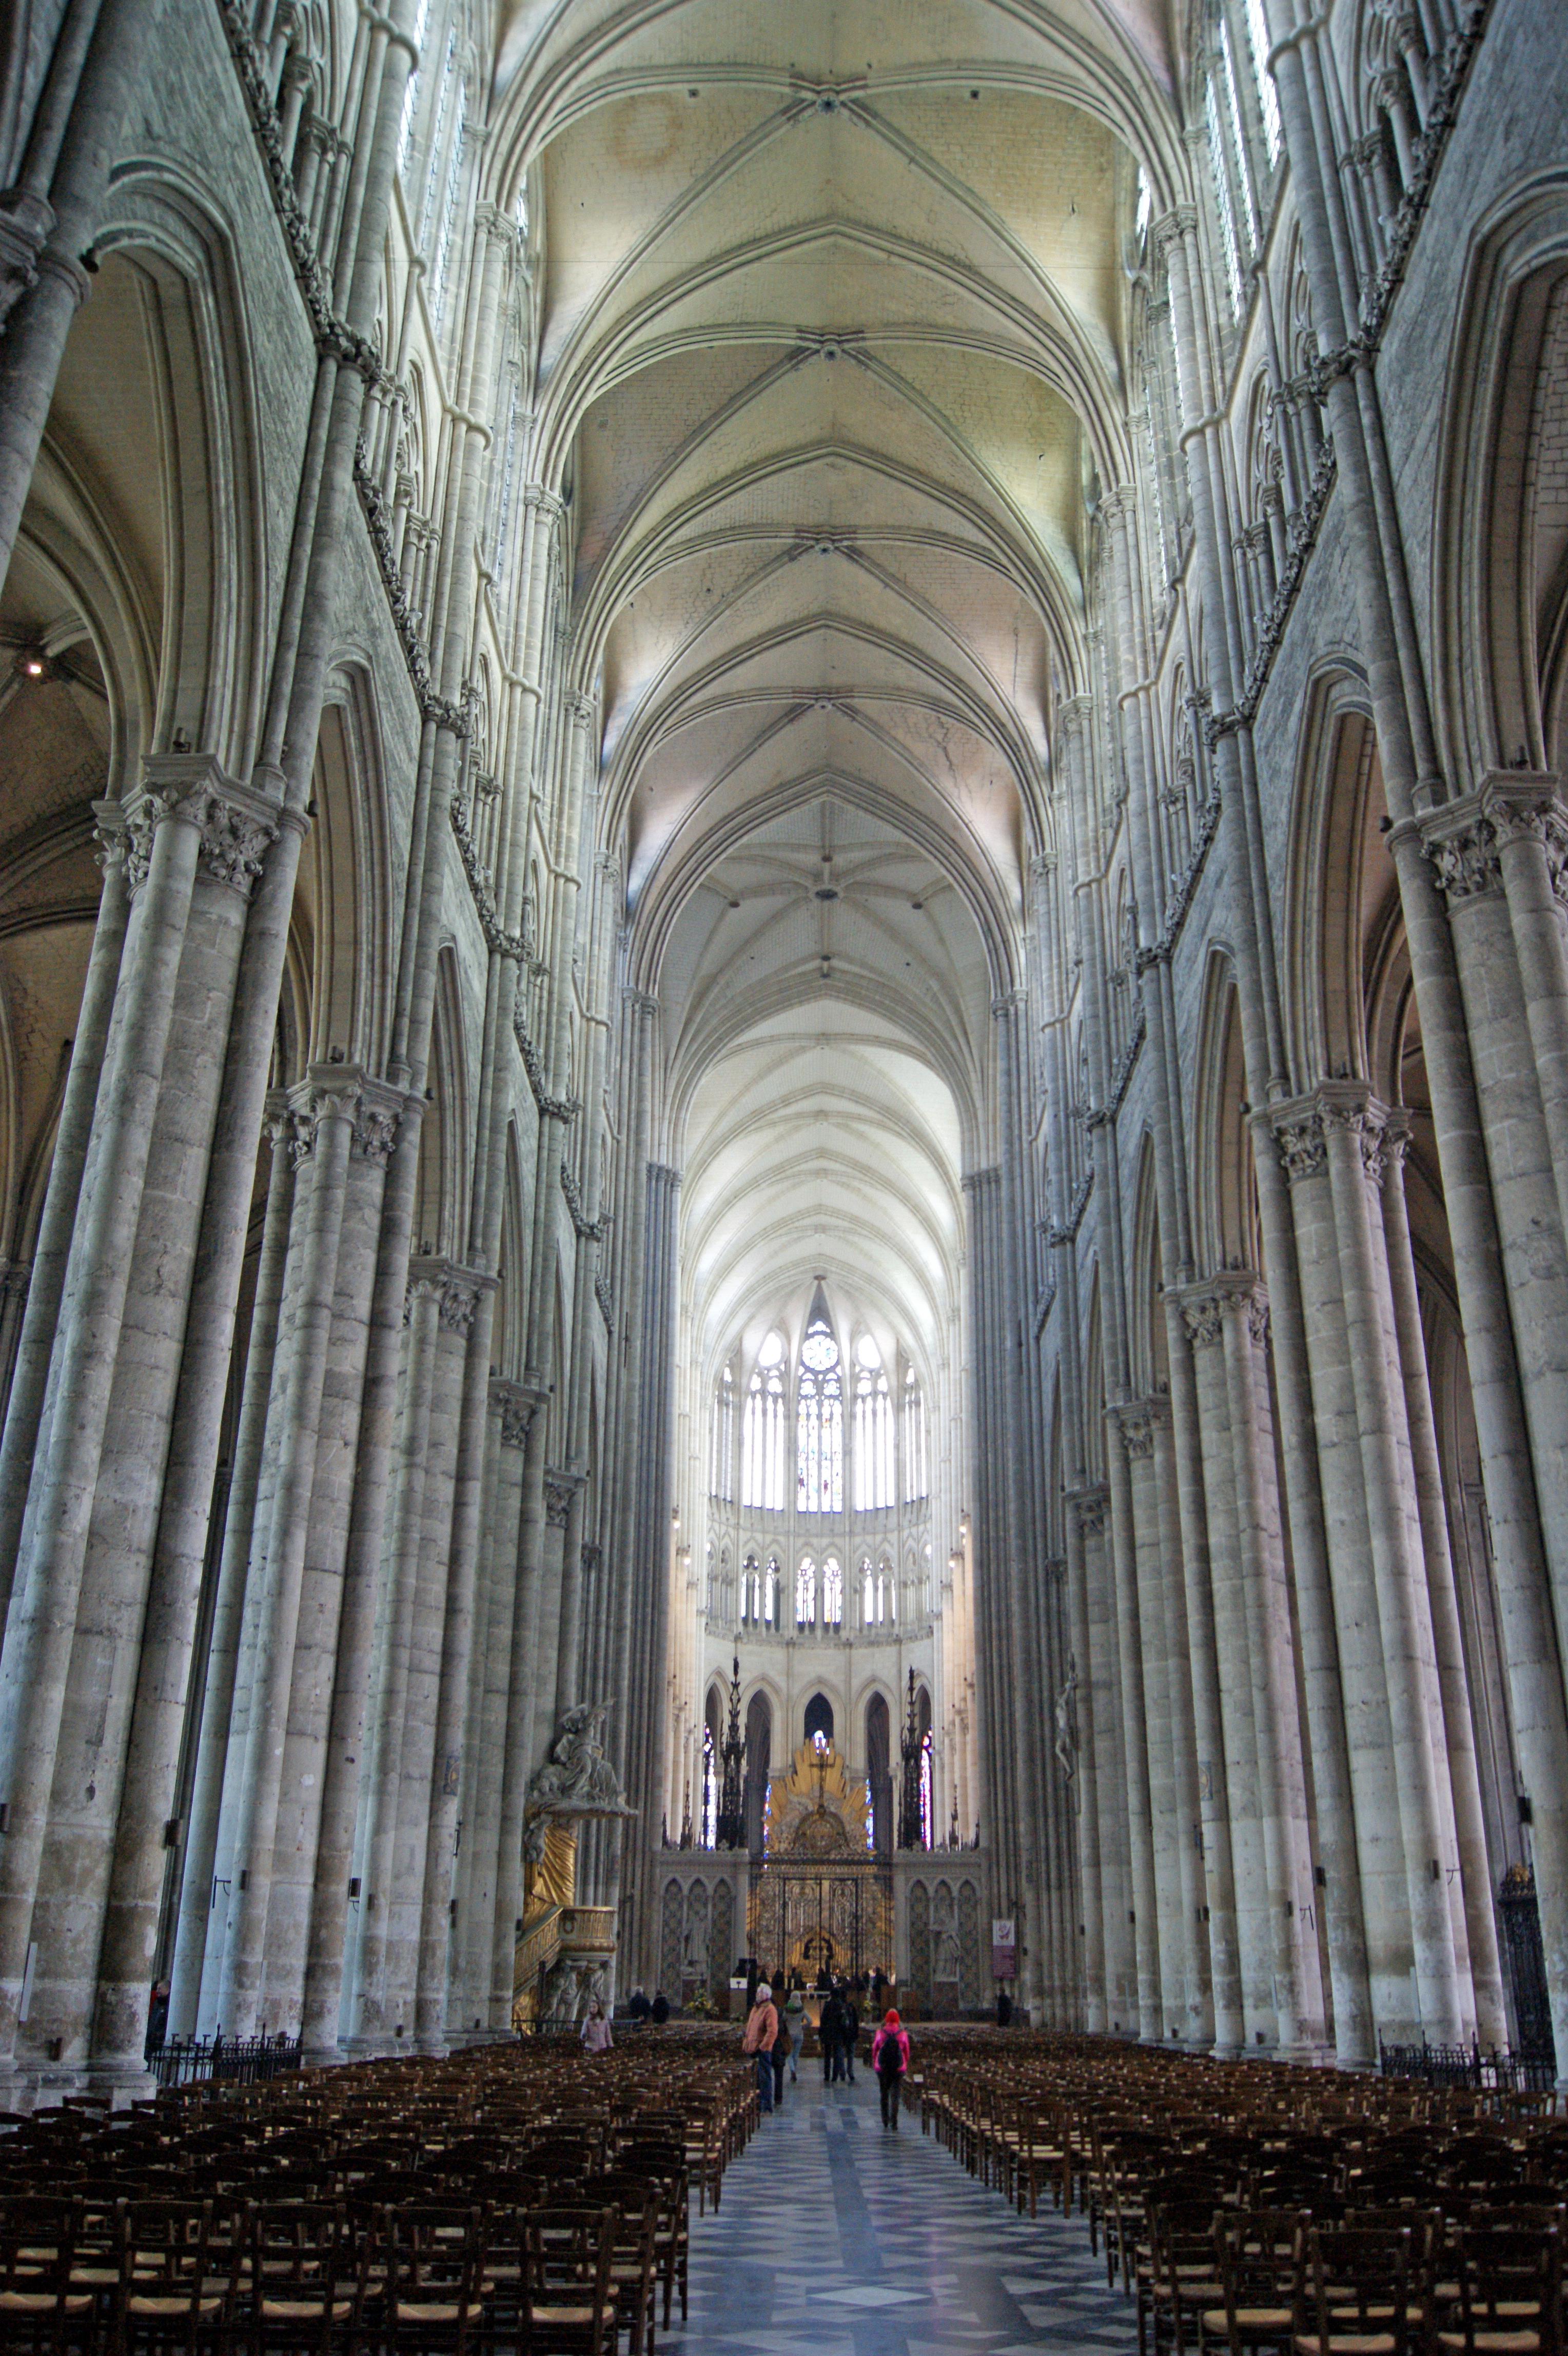 what is special about the amiens cathedral